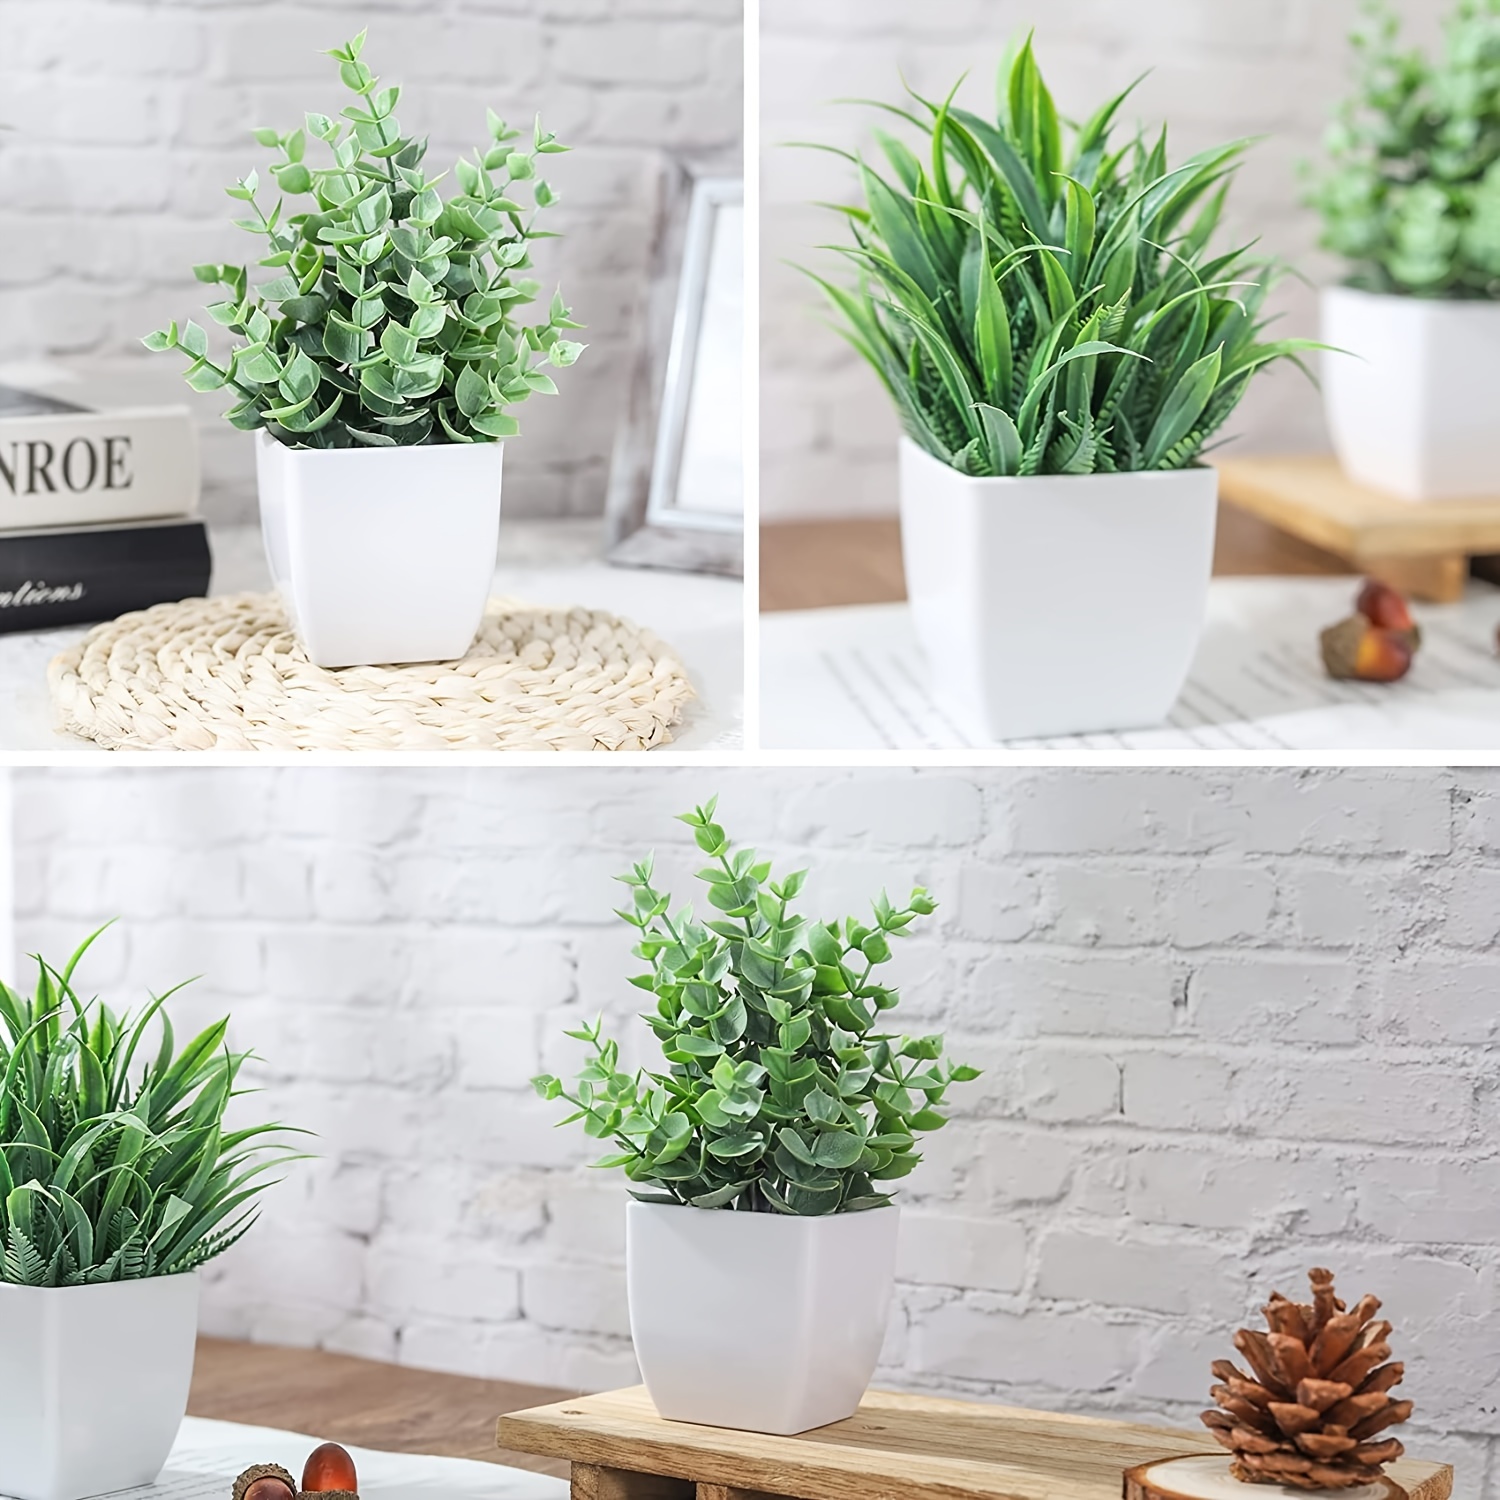 2 Pcs Fake Plants for Bathroom/Home Office Decor, Small Artificial Faux  Greenery for House Decorations (Potted Plants)